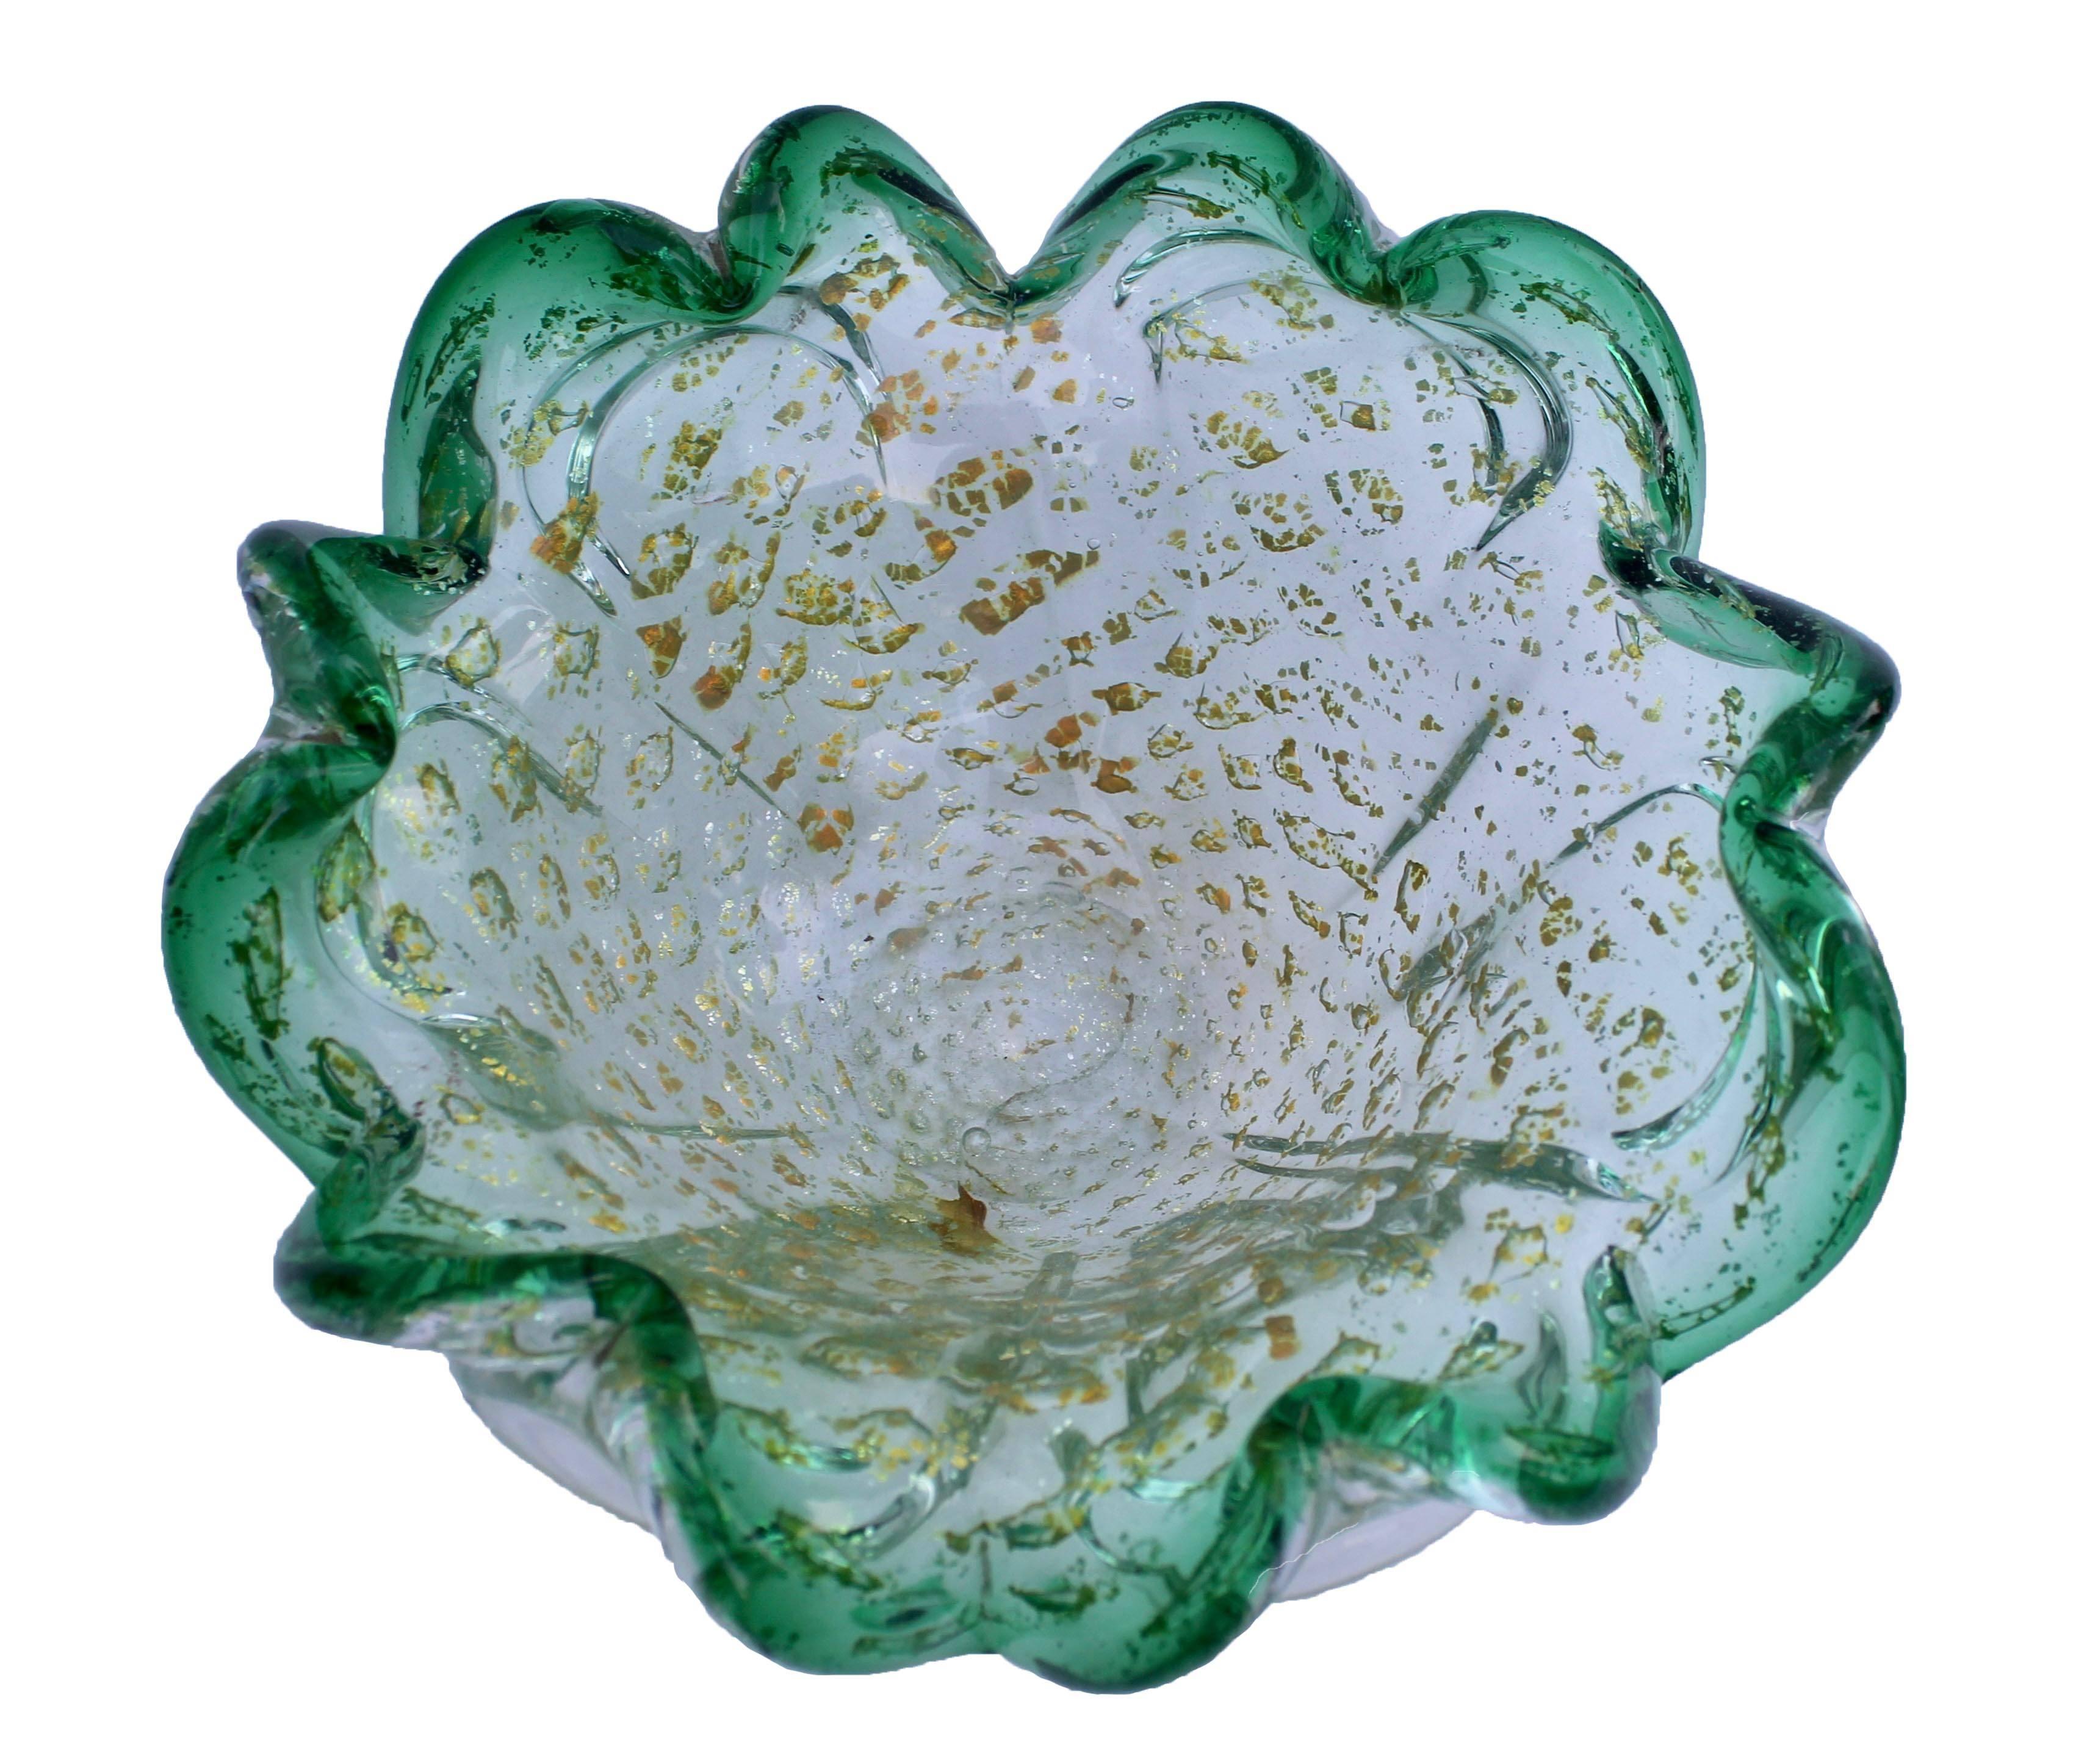 Hand-Crafted Murano Glass Chartreuse and Gold Fleck Ruffle Biomorphic Bowls of 1950s